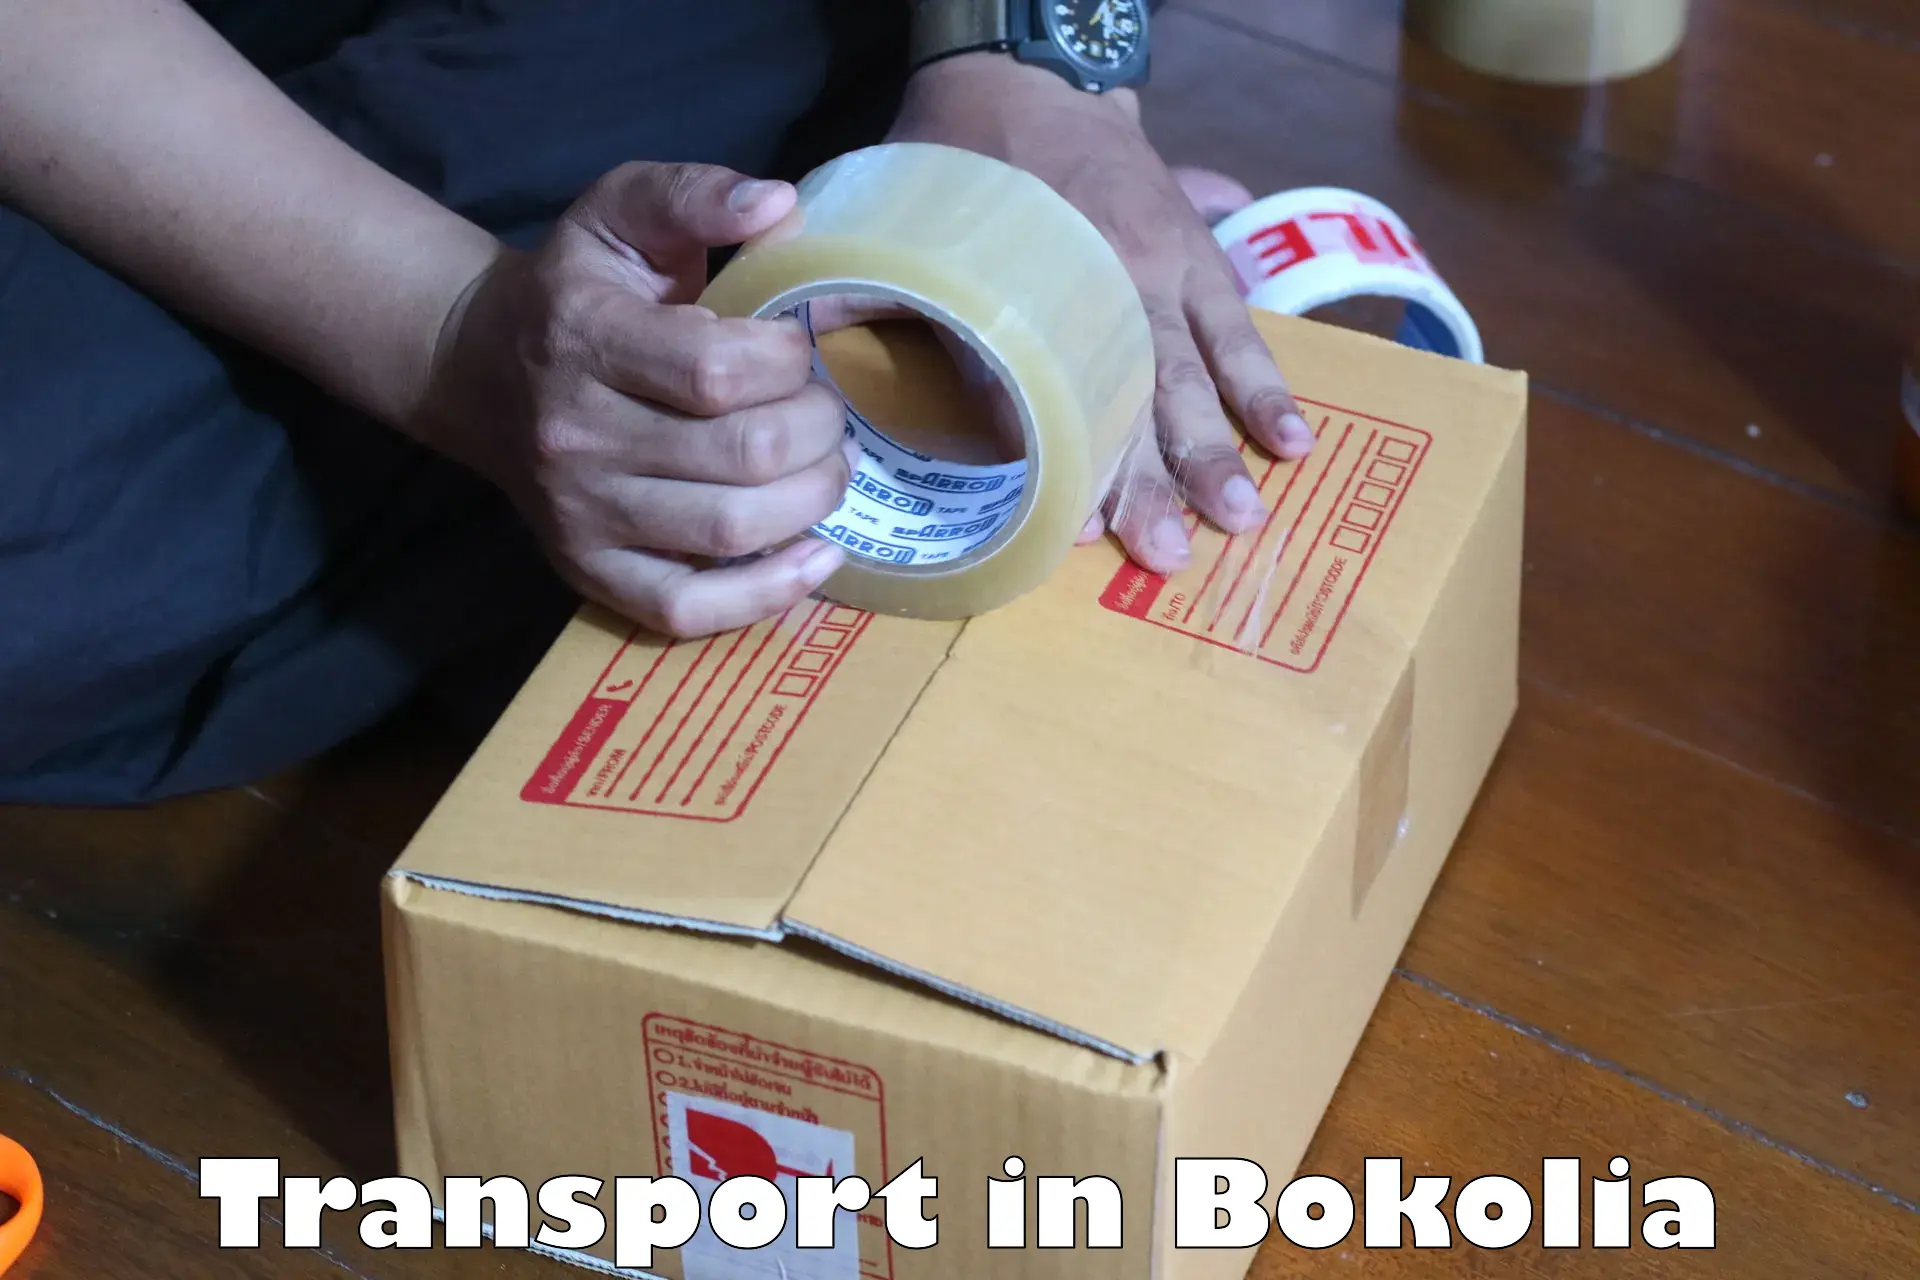 Transport shared services in Bokolia